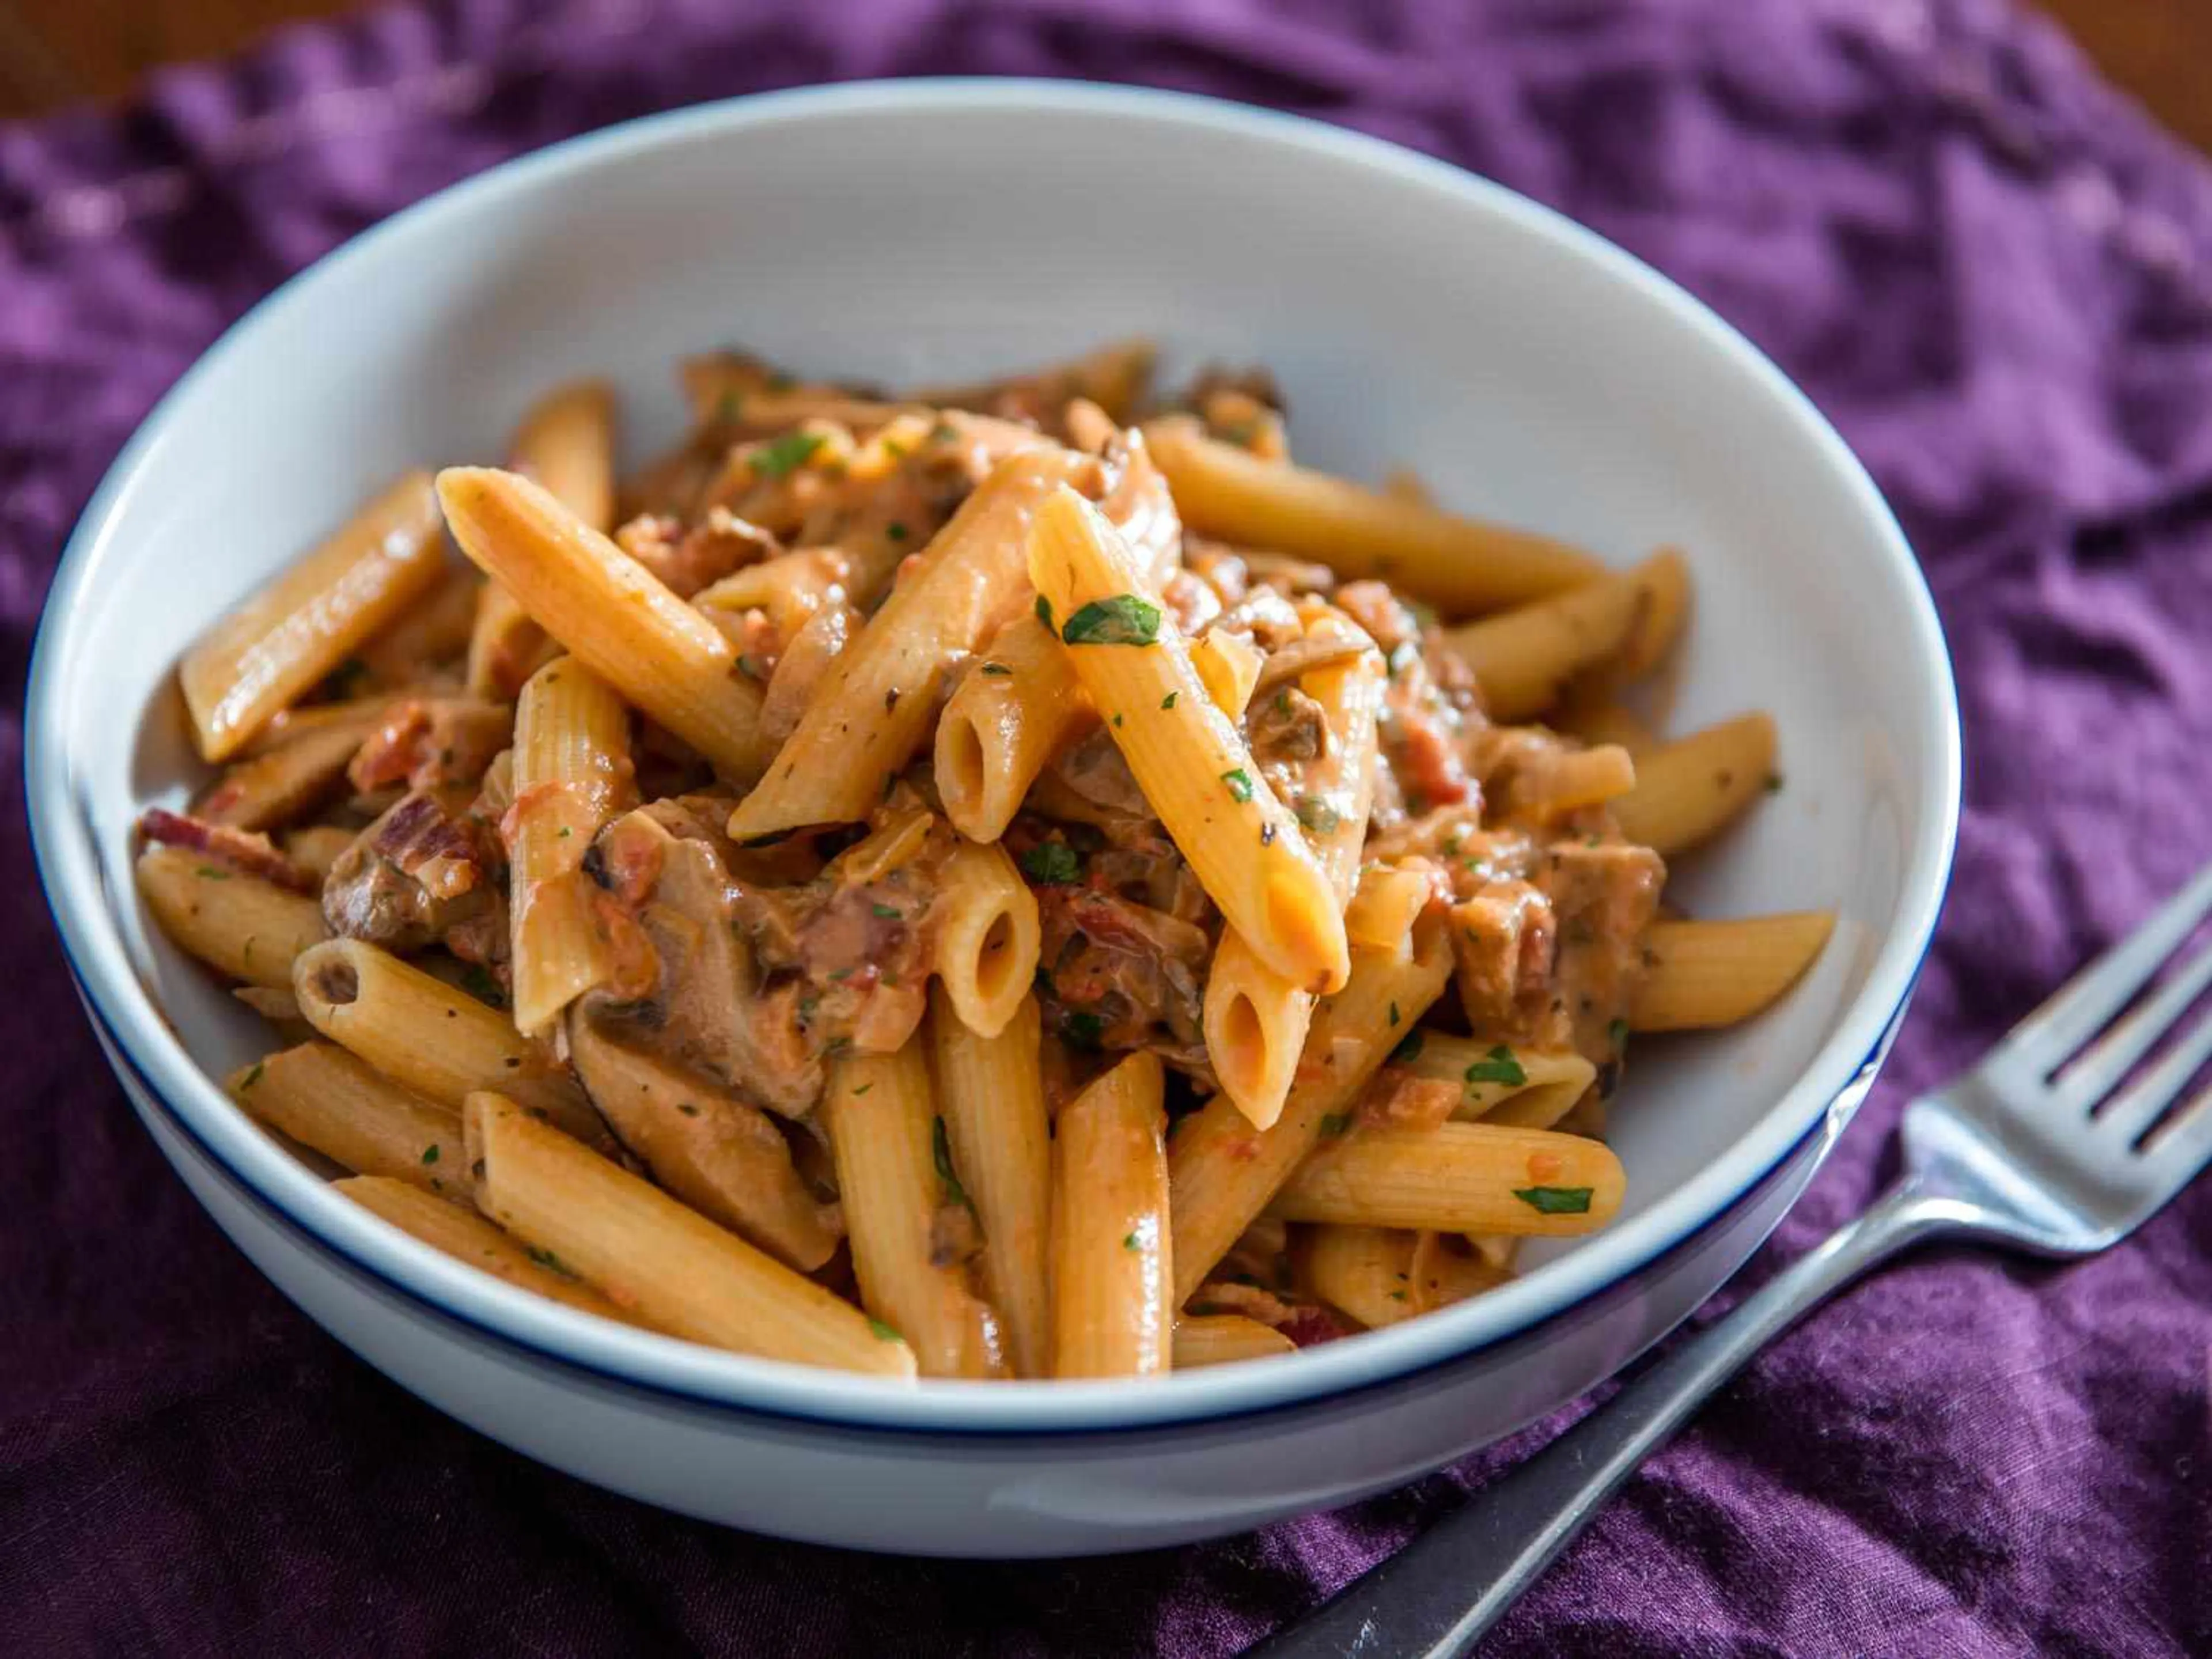 Penne Boscaiola (Woodsman-Style Pasta With Mushrooms and Bac